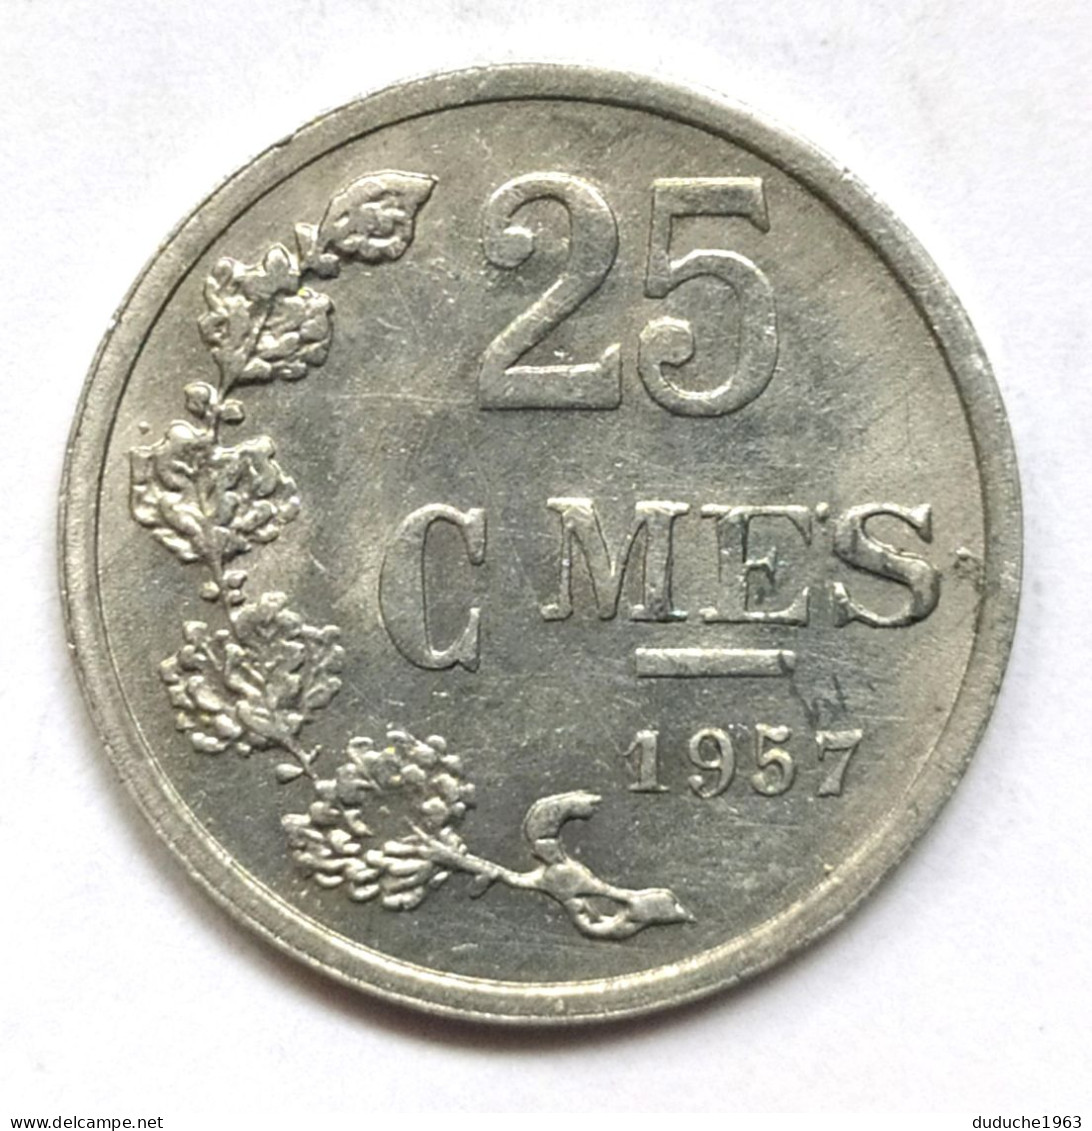 Luxembourg - 25 Centimes 1957 - Luxembourg